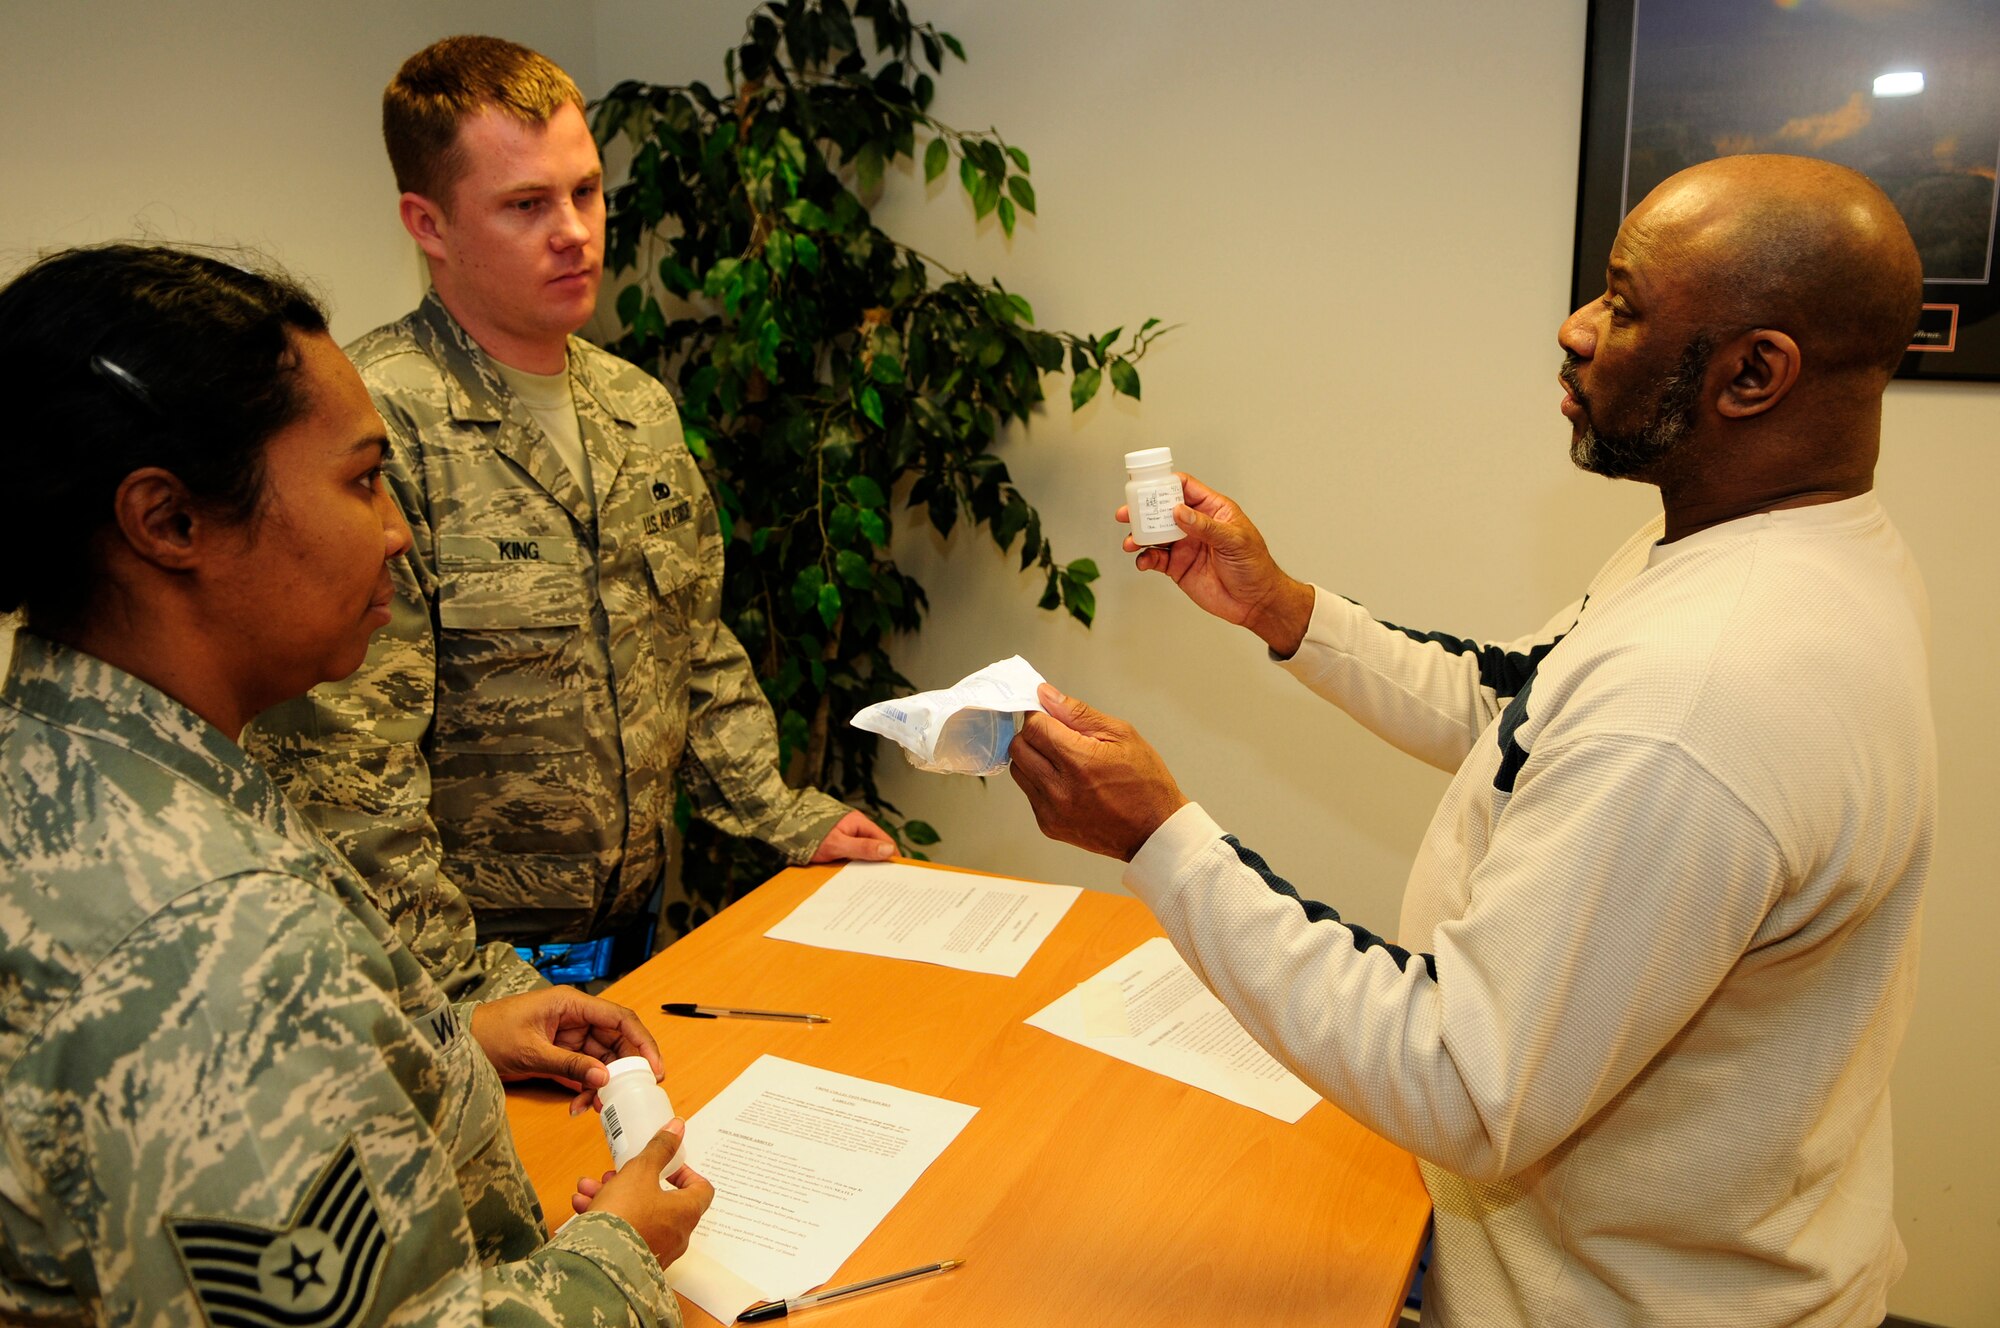 (From left) Tech. Sgt. Lucita Wargel, 735th Civil Engineer Squadron technician, and Staff Sgt. Bryan King, 721st Aircraft Maintenance Squadron maintainer, receive instructions on how to collect urine samples from Jeffrey Kidd, Drug Testing Program administrative manager, during a sobriety checkpoint Feb. 7, 2009, at Ramstein Air Base. Sobriety checkpoints are held randomly throughout the Kaiserslautern Military Community in an effort to enforce a zero-tolerance policy against driving under the influence of drugs and alcohol. (U.S. Air Force photo by Staff Sgt. Stephen J. Otero) 